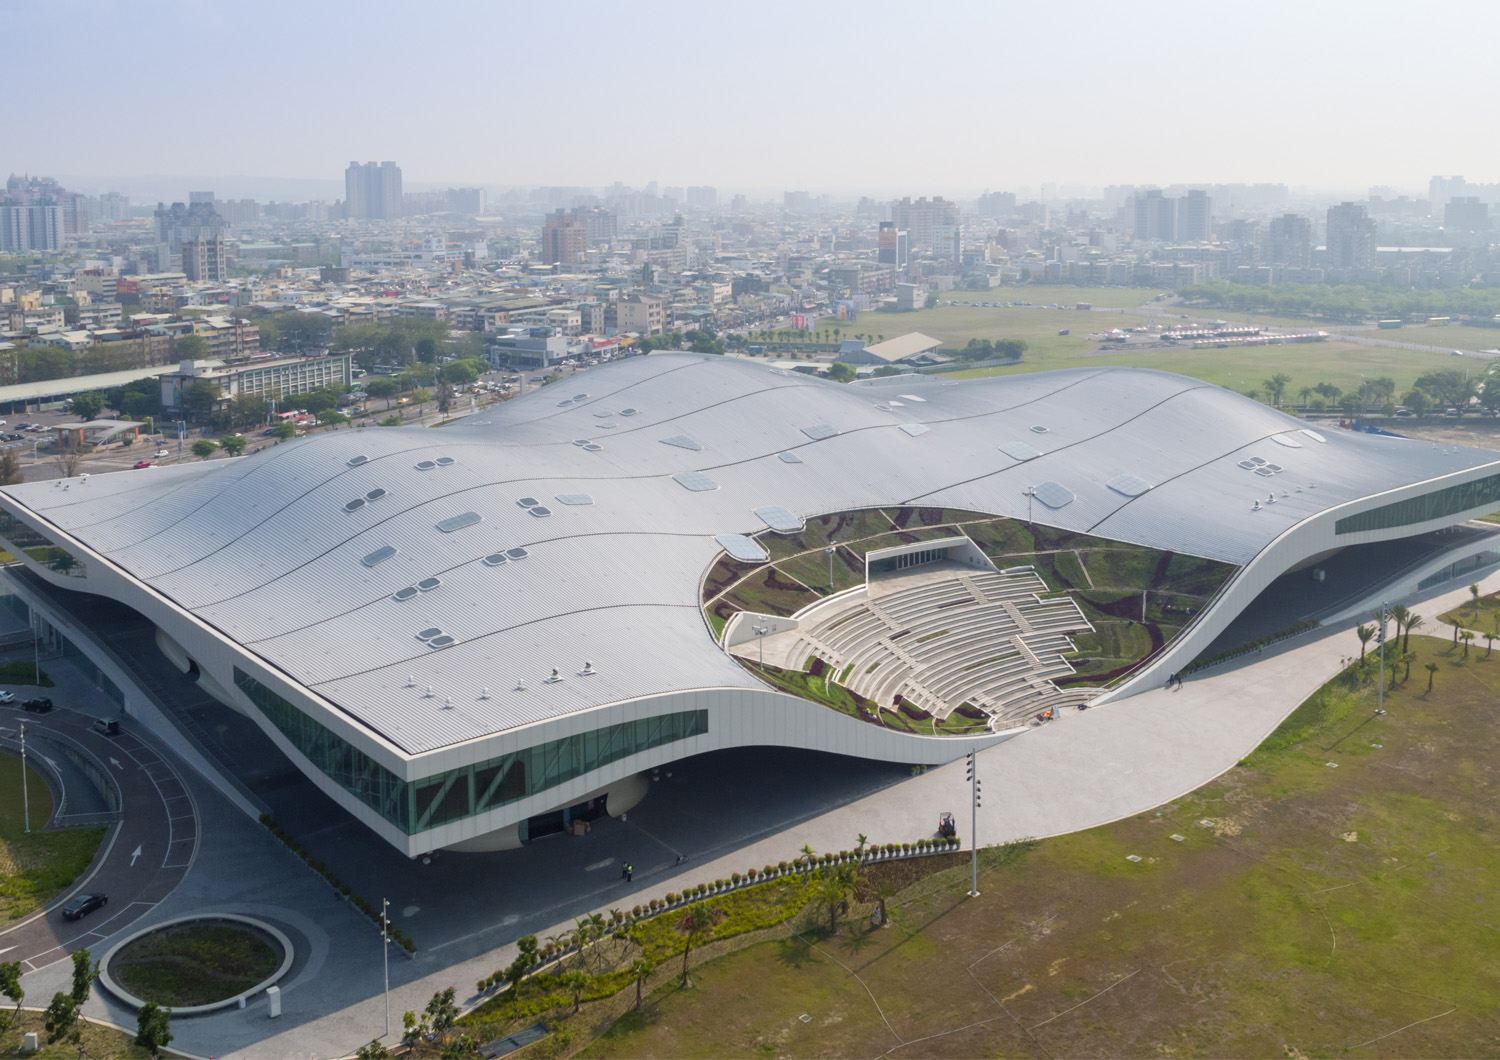 performance arts venues performance art venues National Kaohsiung Centre for the Arts by Mecanoo, Kaohsiung, Taiwan